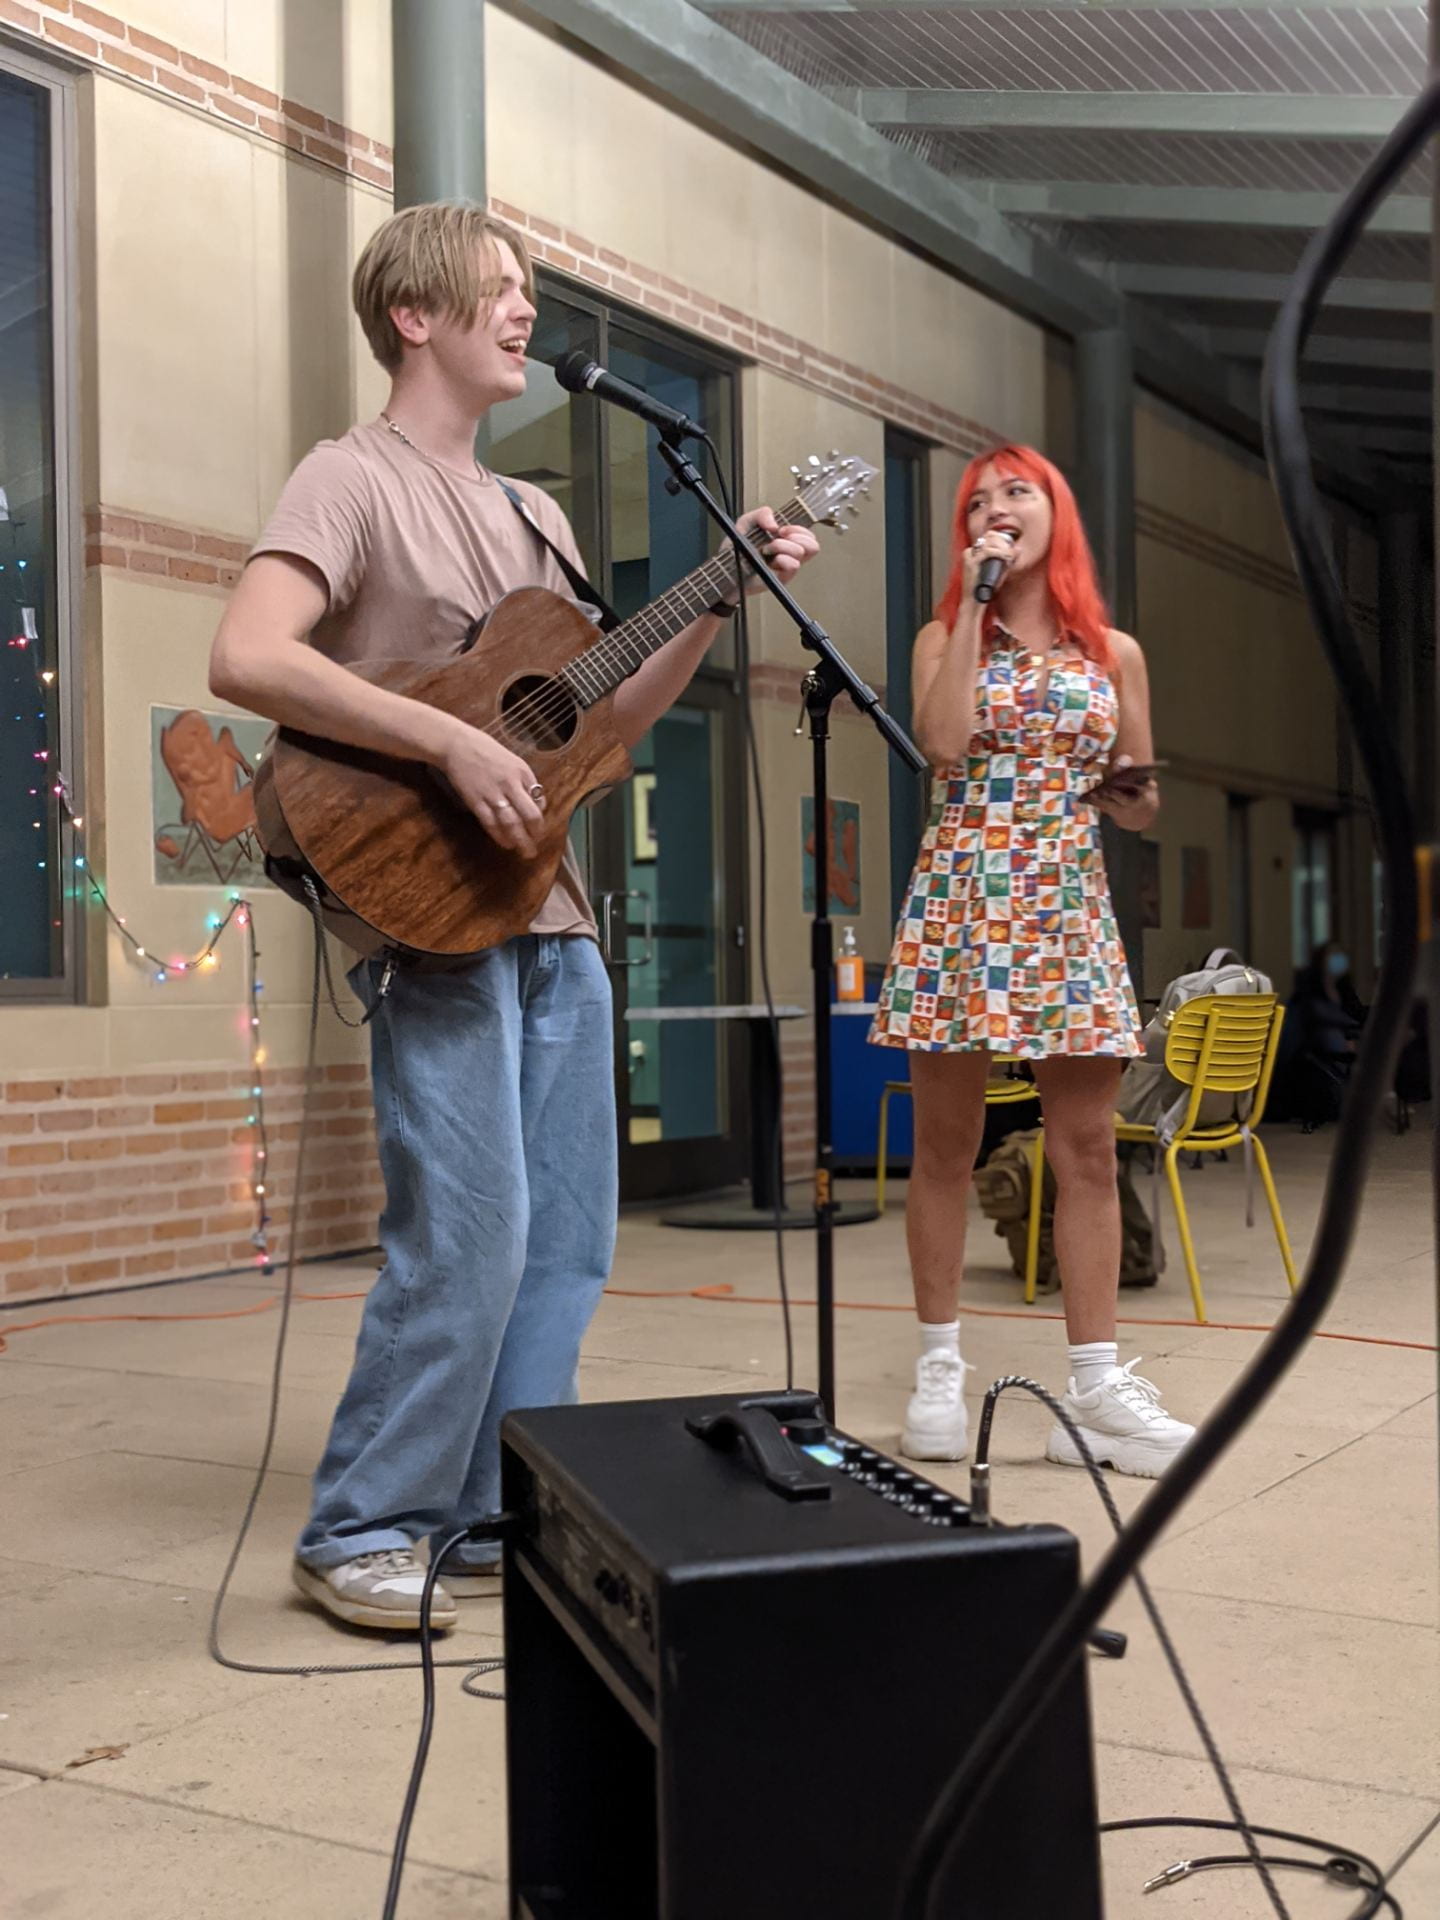 A picture of two college students, a man and a woman, performing a song at an outdoor college event. The man is playing an accoustic guitar, and the woman is singing into a microphone